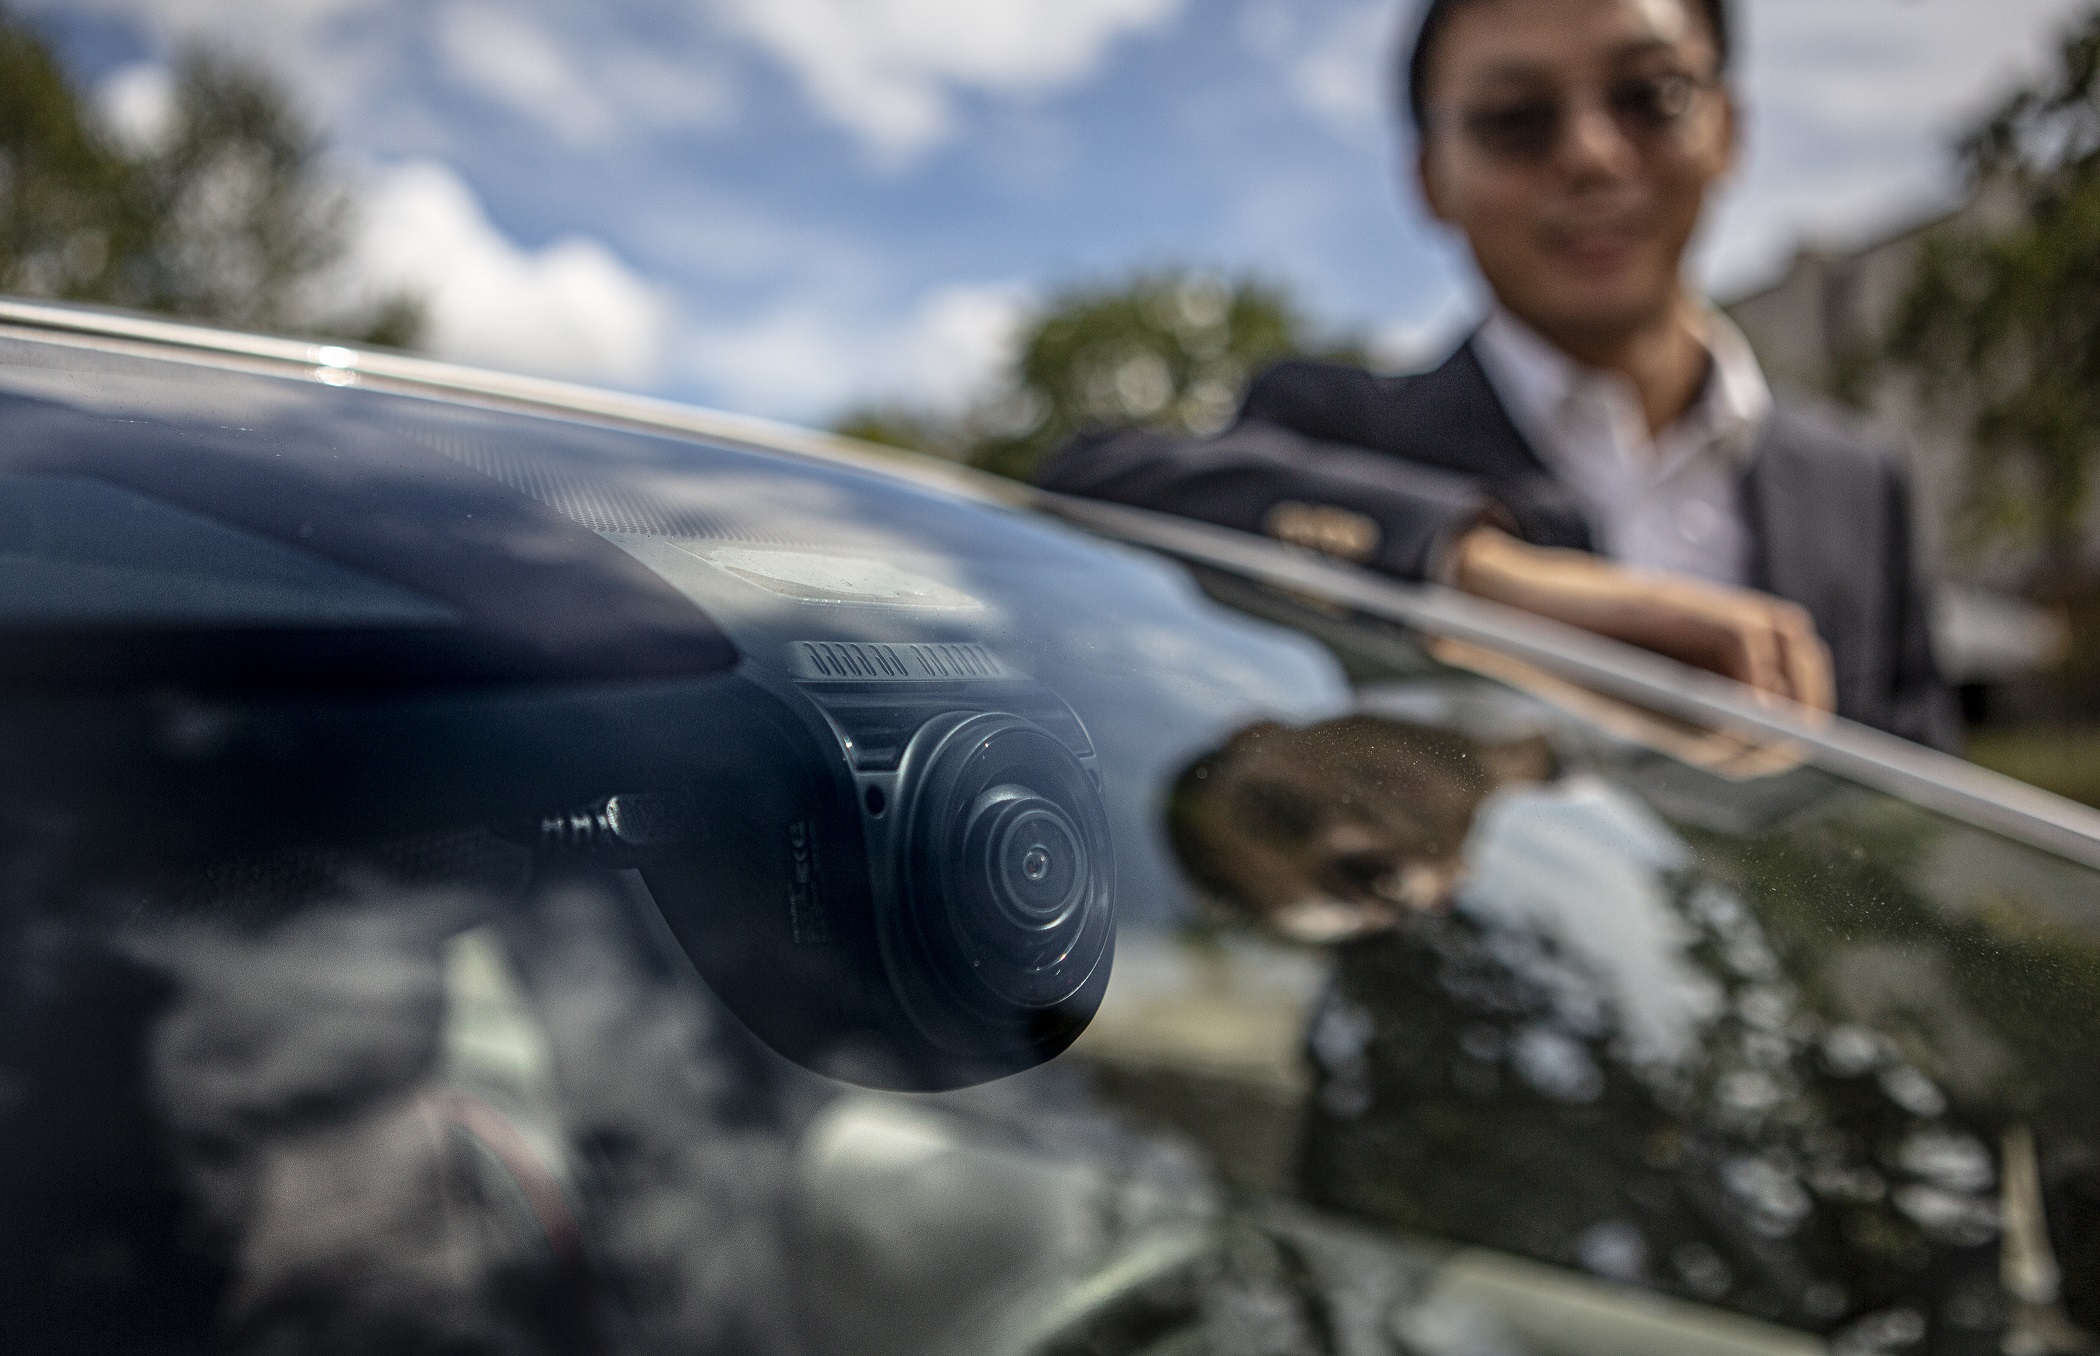 In the foreground, looking into a car's windshield, we see a camera mounted just below the rear-view mirror, aimed at the driver. In the background, Dr. Ning Wang stands smiling while standing by the driver's side door of a small silver sedan. 